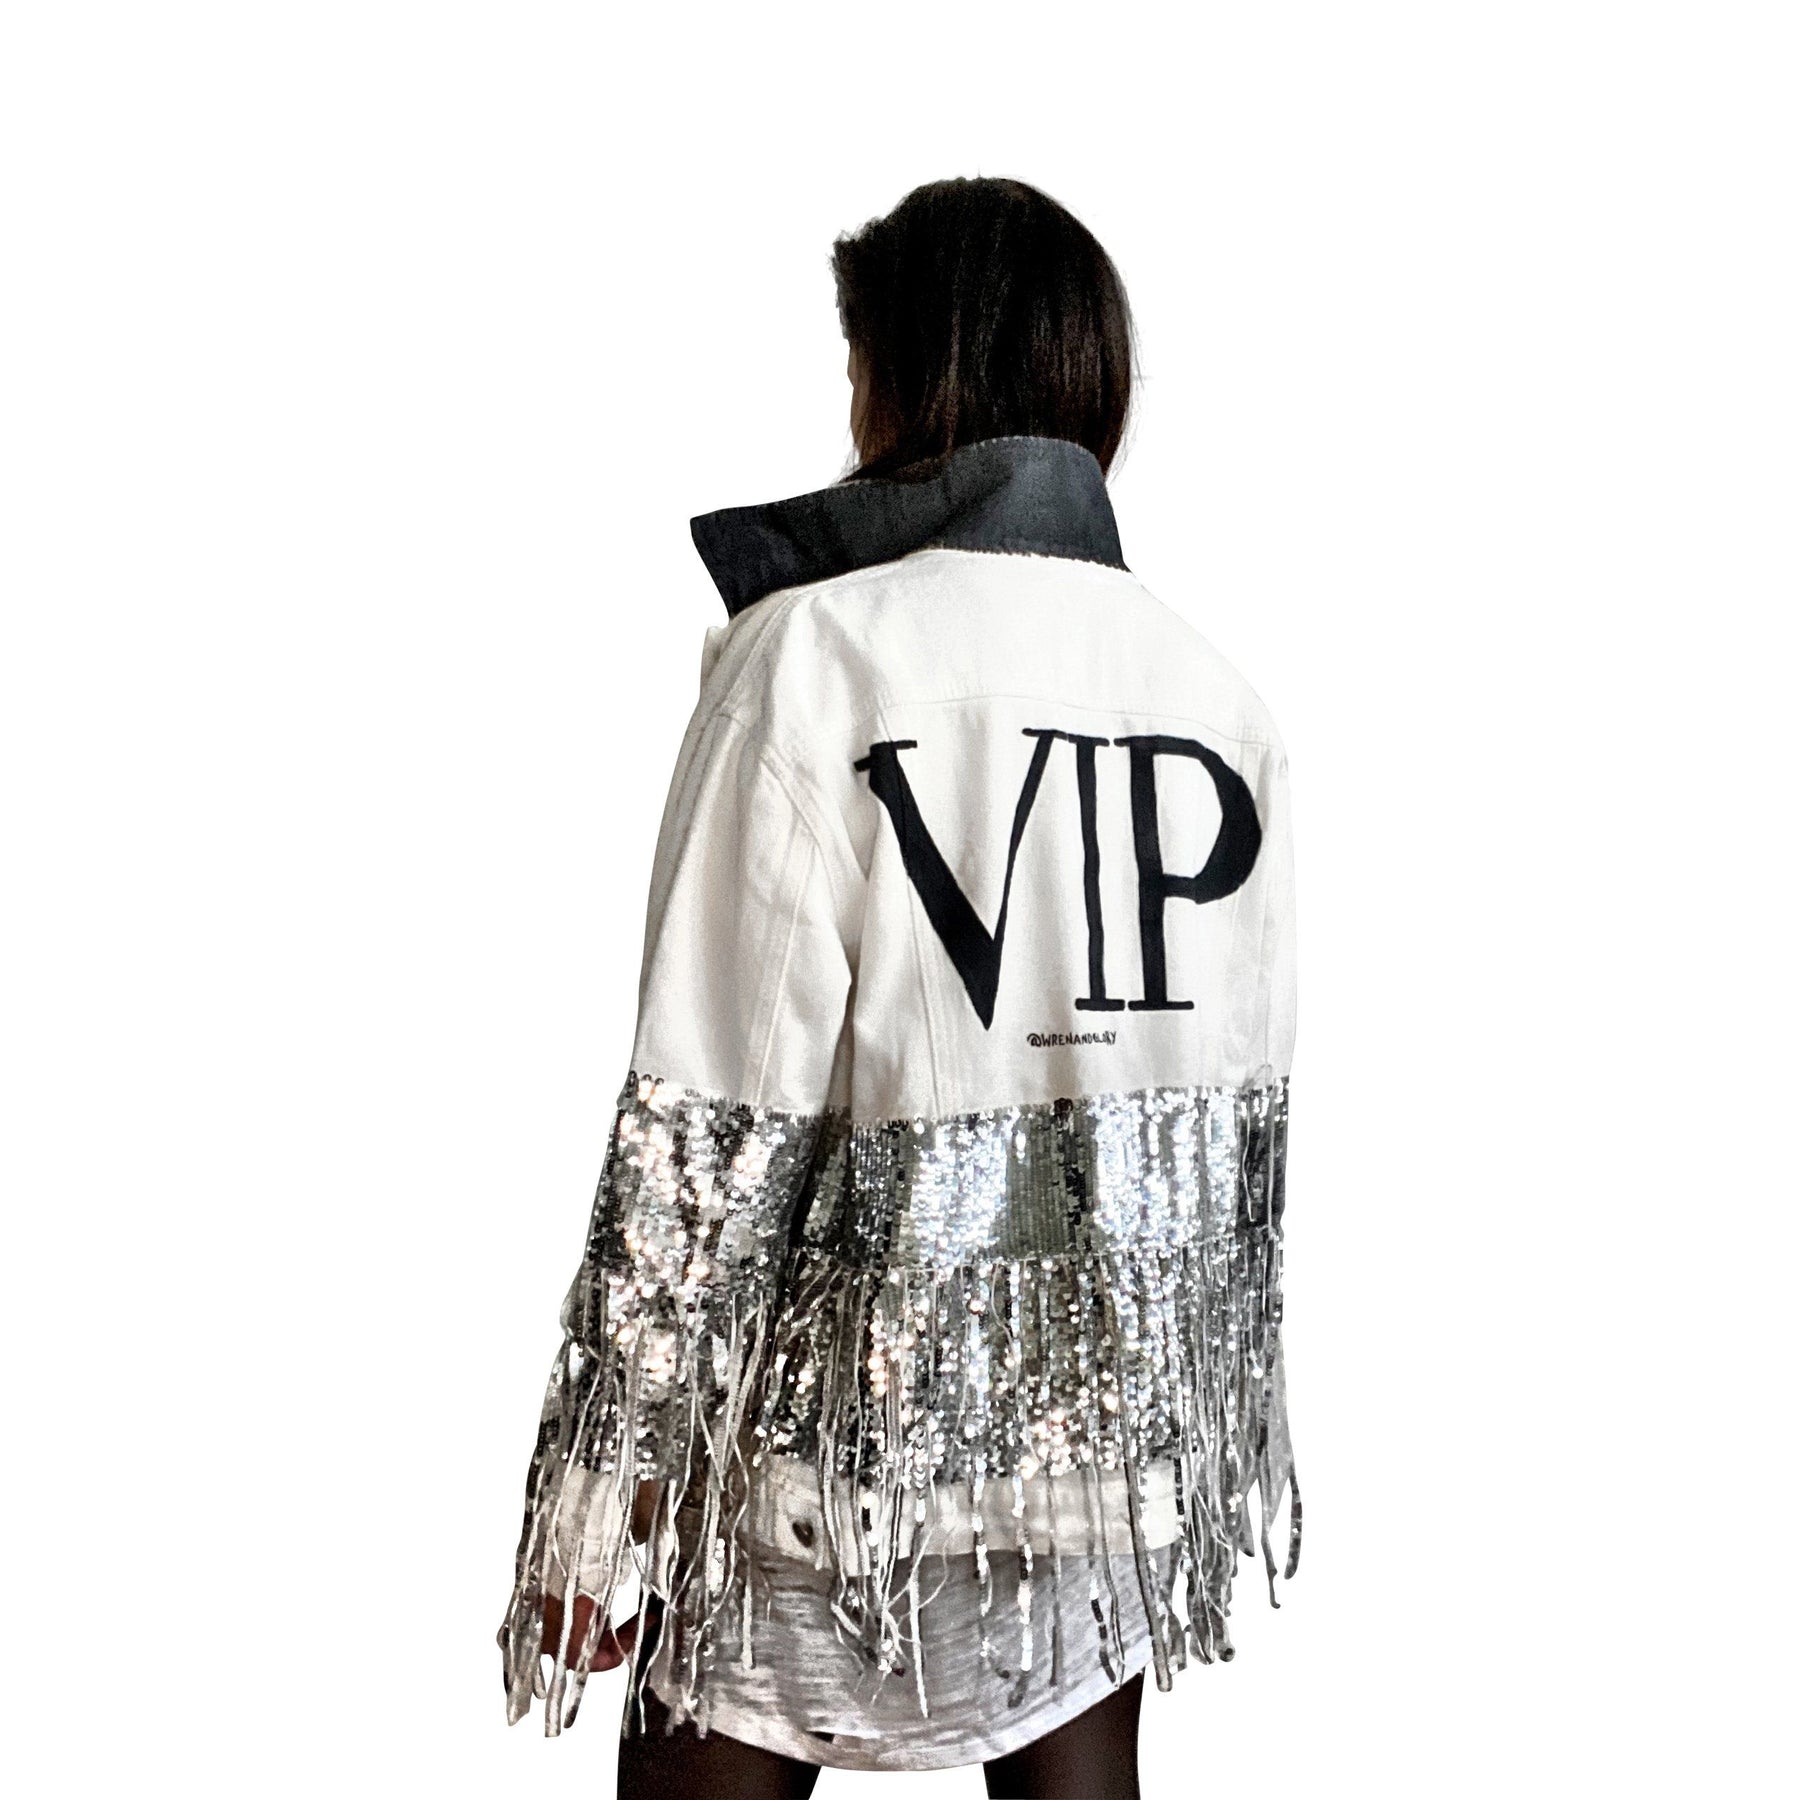 White denim jacket with black sequin fringes hanging off on bottom half of jacket, and below elbows, VIP painted in large on back. Pockets and collar painted black. Signed @wrenandglory.